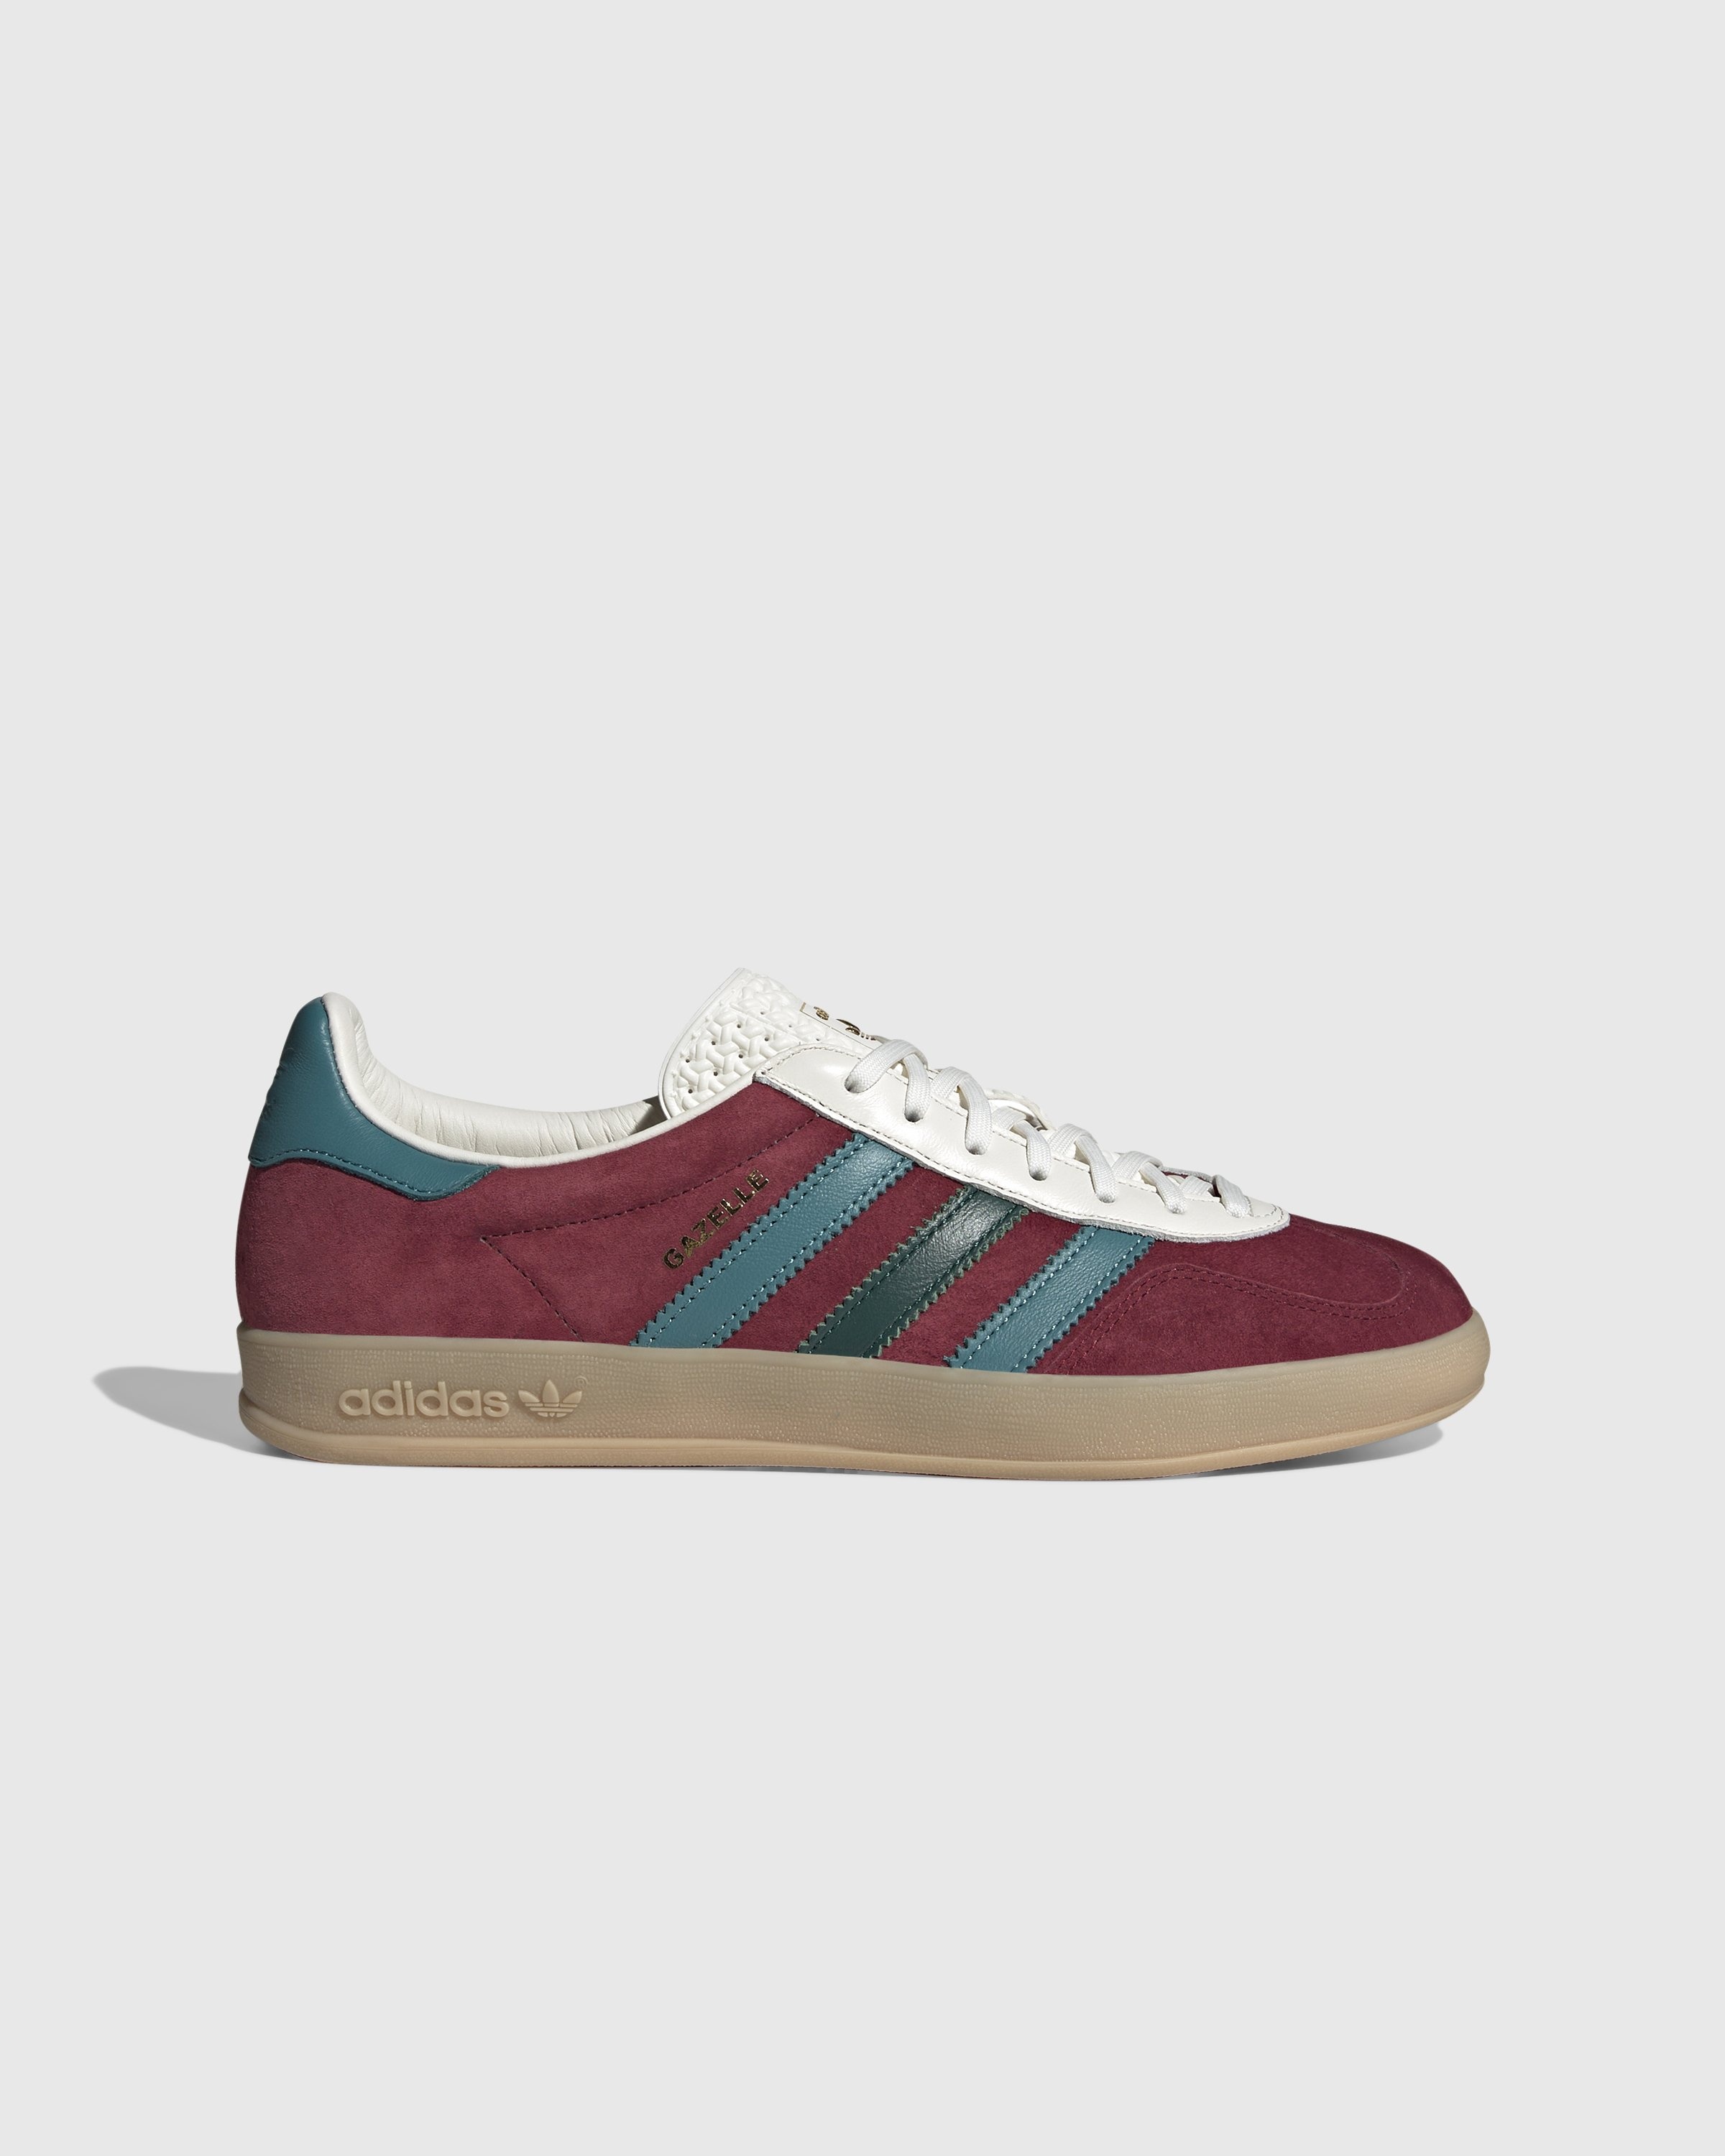 Adidas – adidas – Gazelle Core Burgundy/Green - Sneakers - Red - Image 1